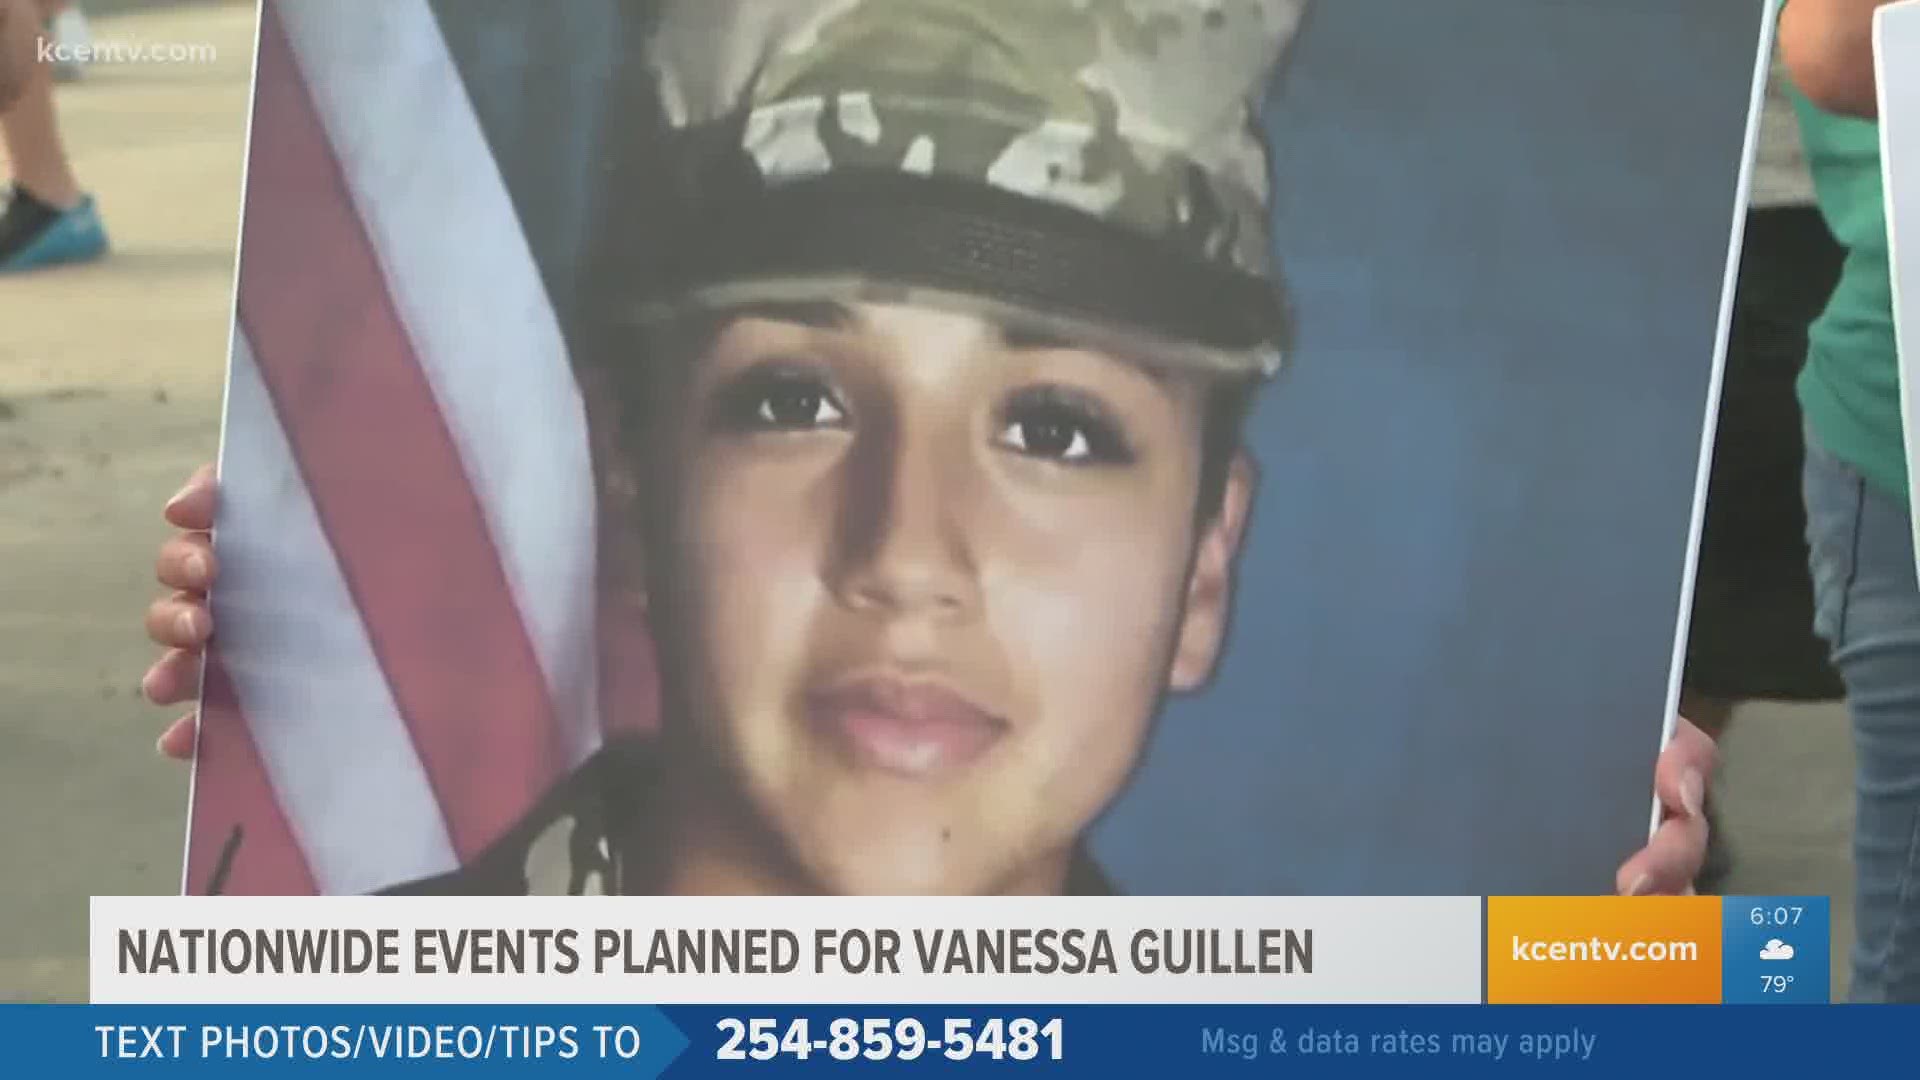 Vanessa Guillen's story is capturing the attention of people across the nation.